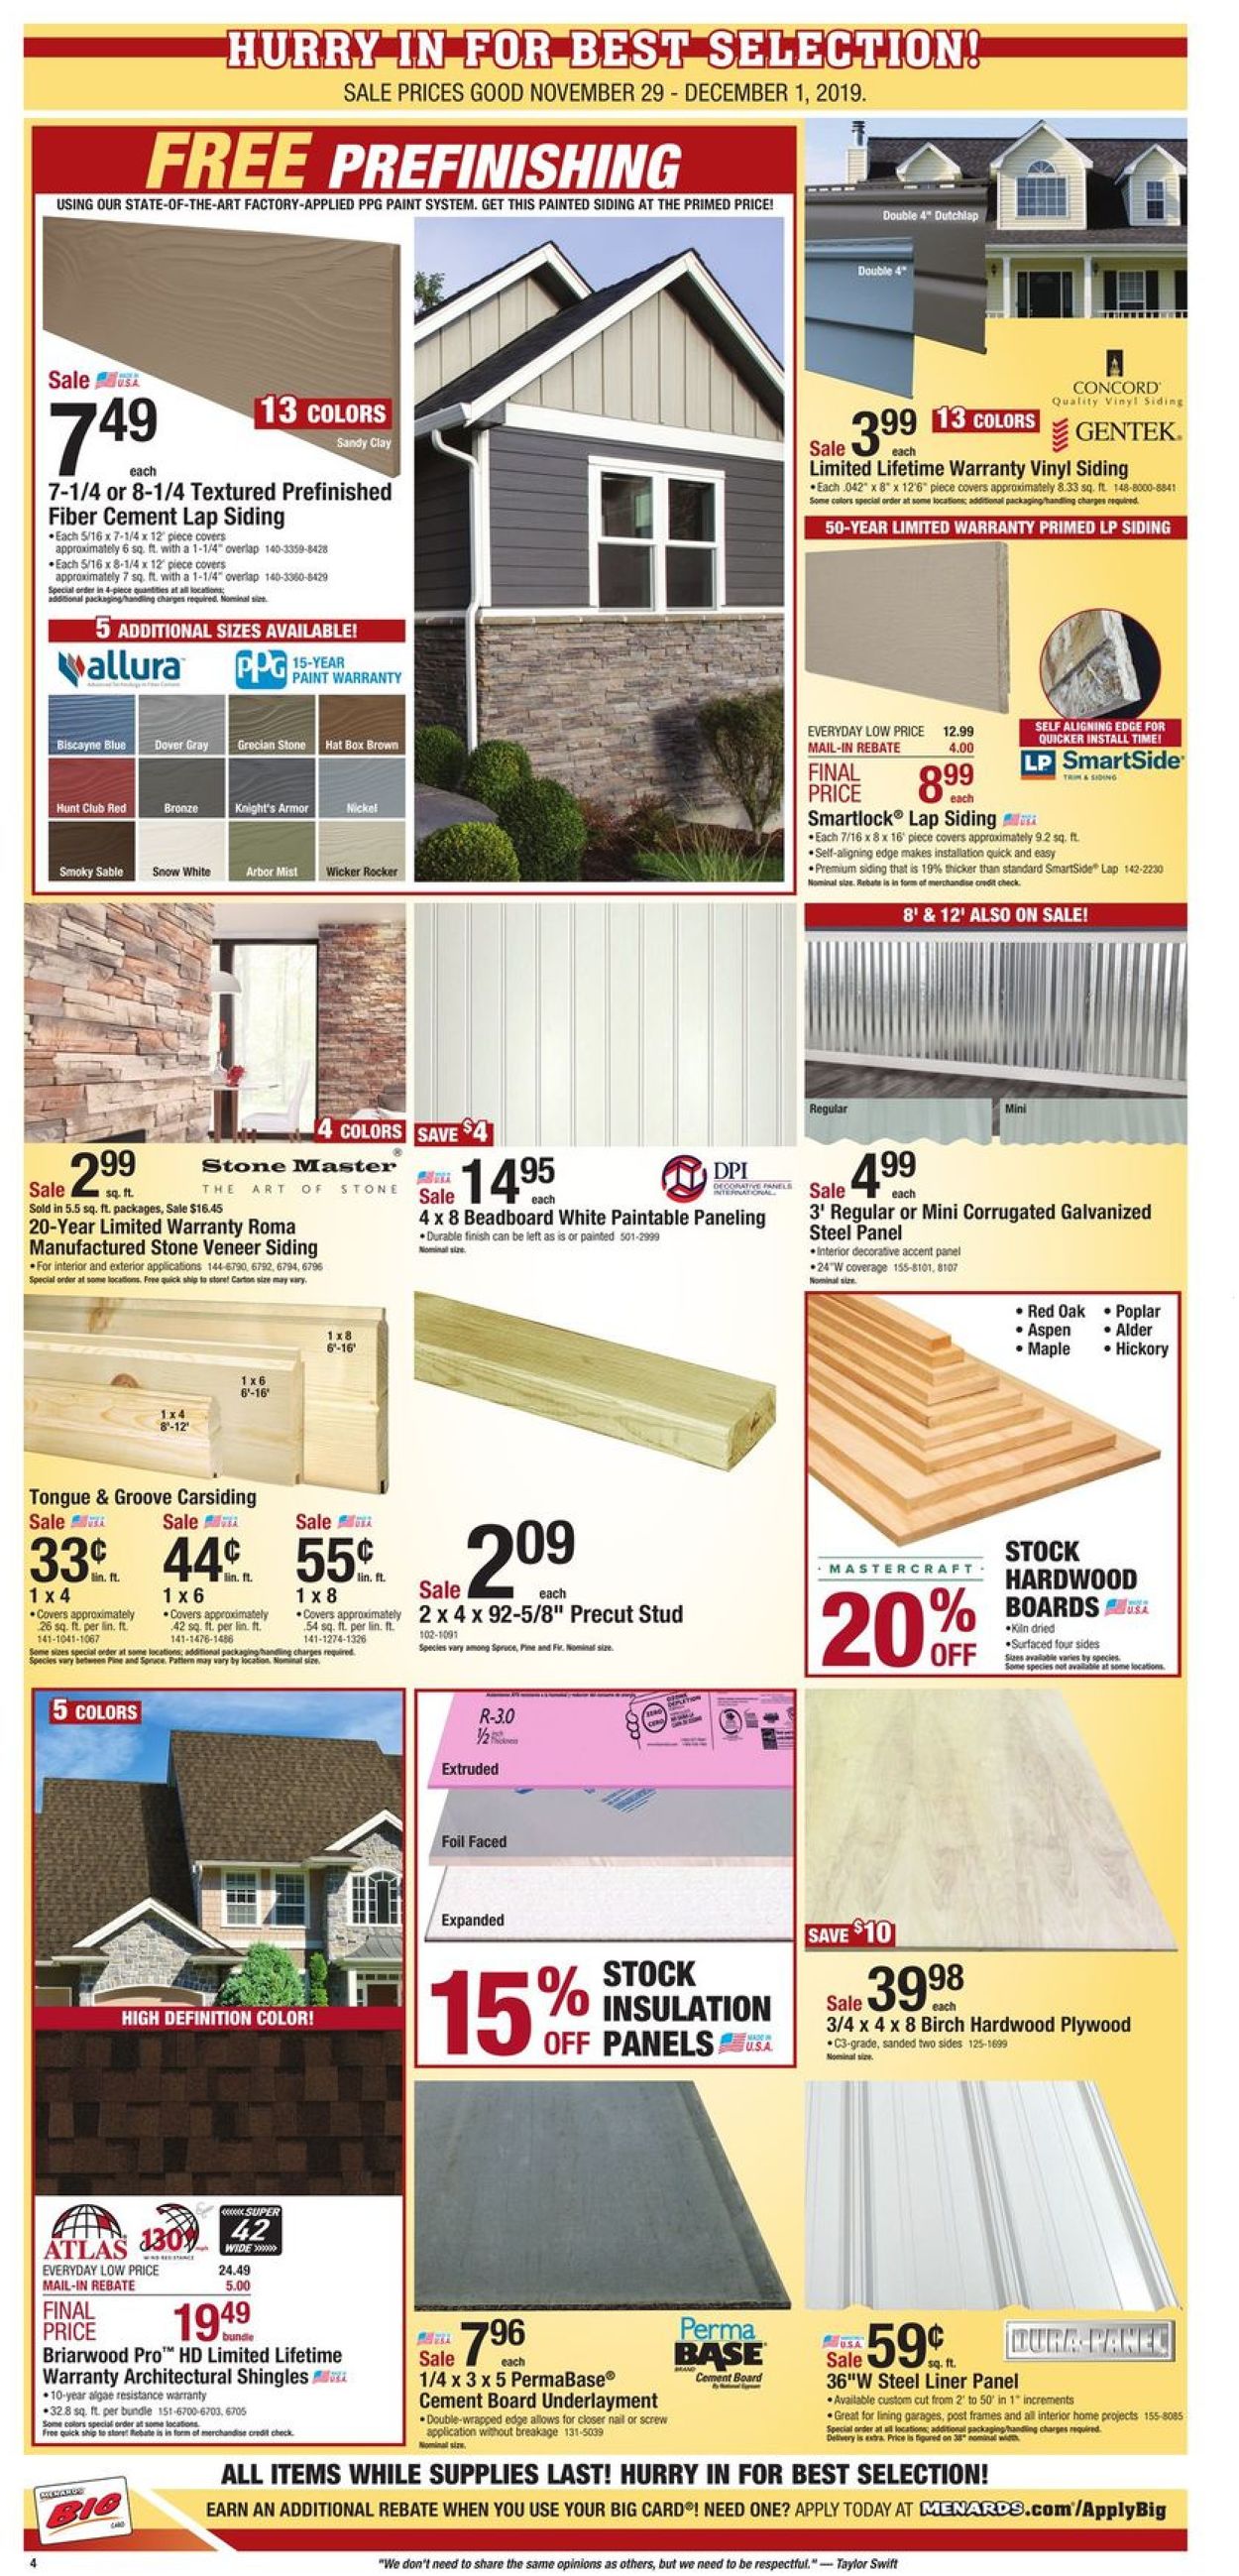 Menards - Black Friday Sale 2019 Current weekly ad 11/29 - 12/01/2019 [4] - 0